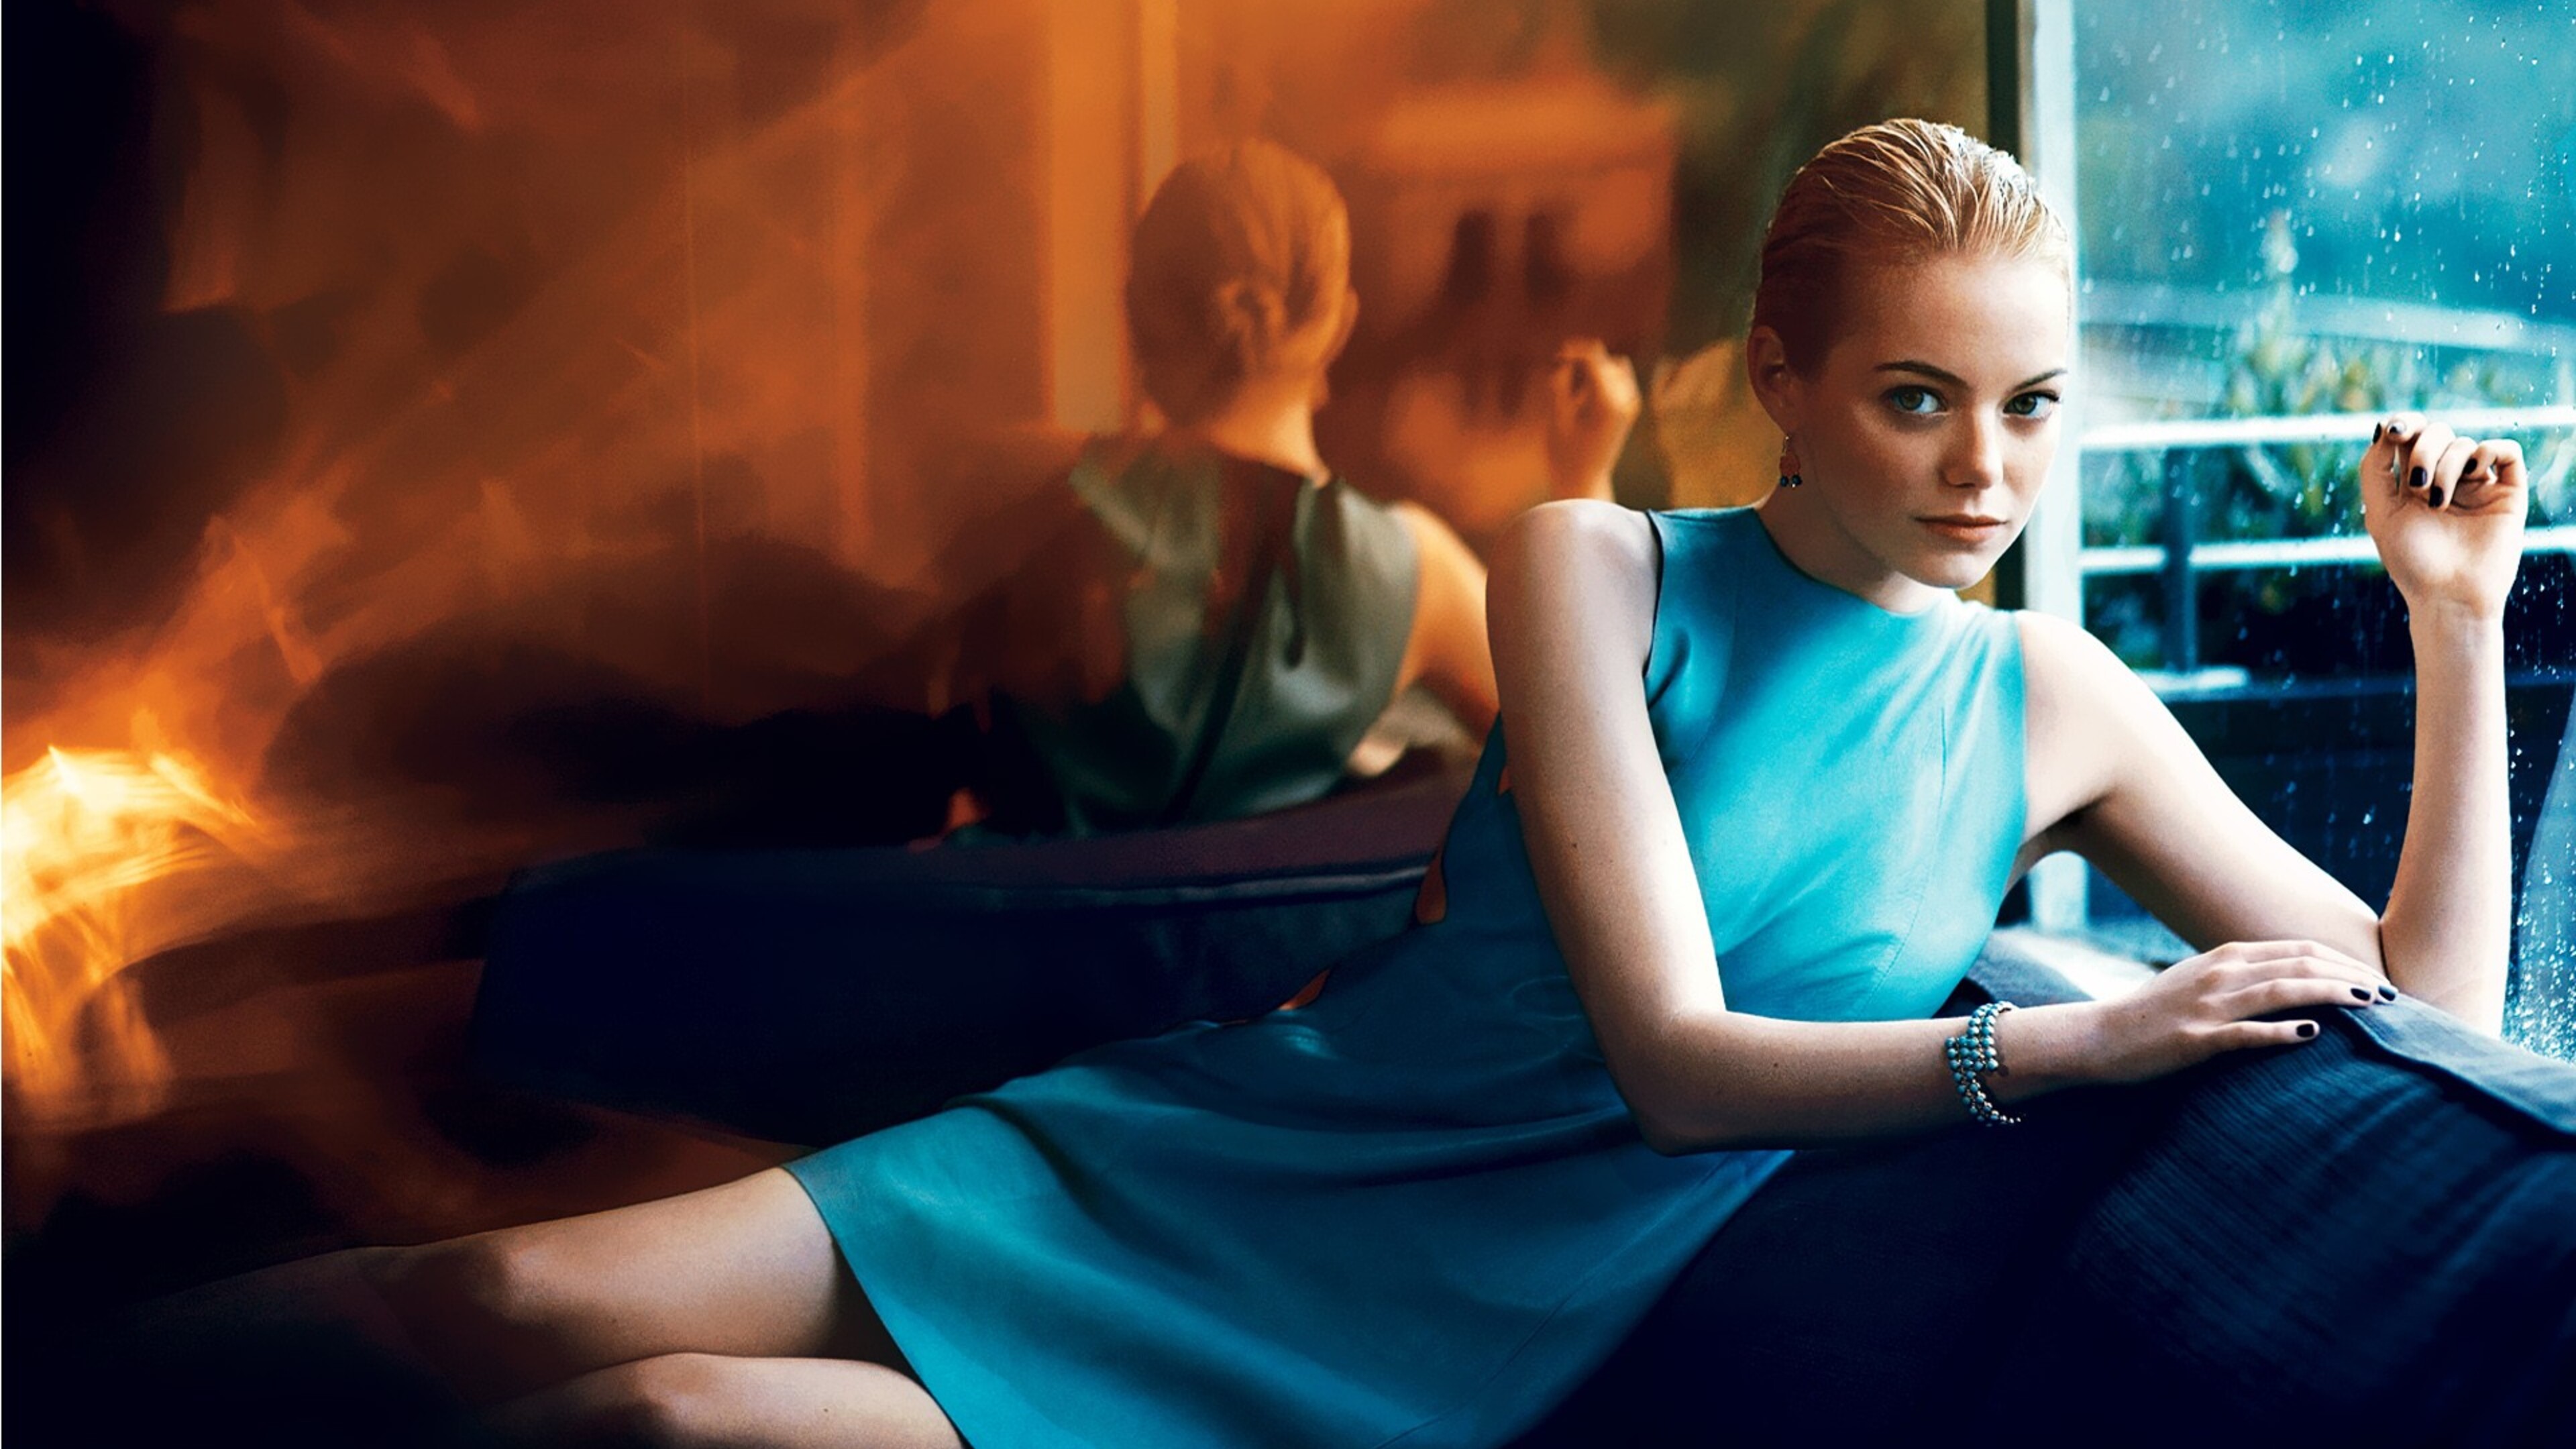 3840x2160 Emma Stone 2 4K ,HD 4k Wallpapers,Images,Backgrounds,Photos ...